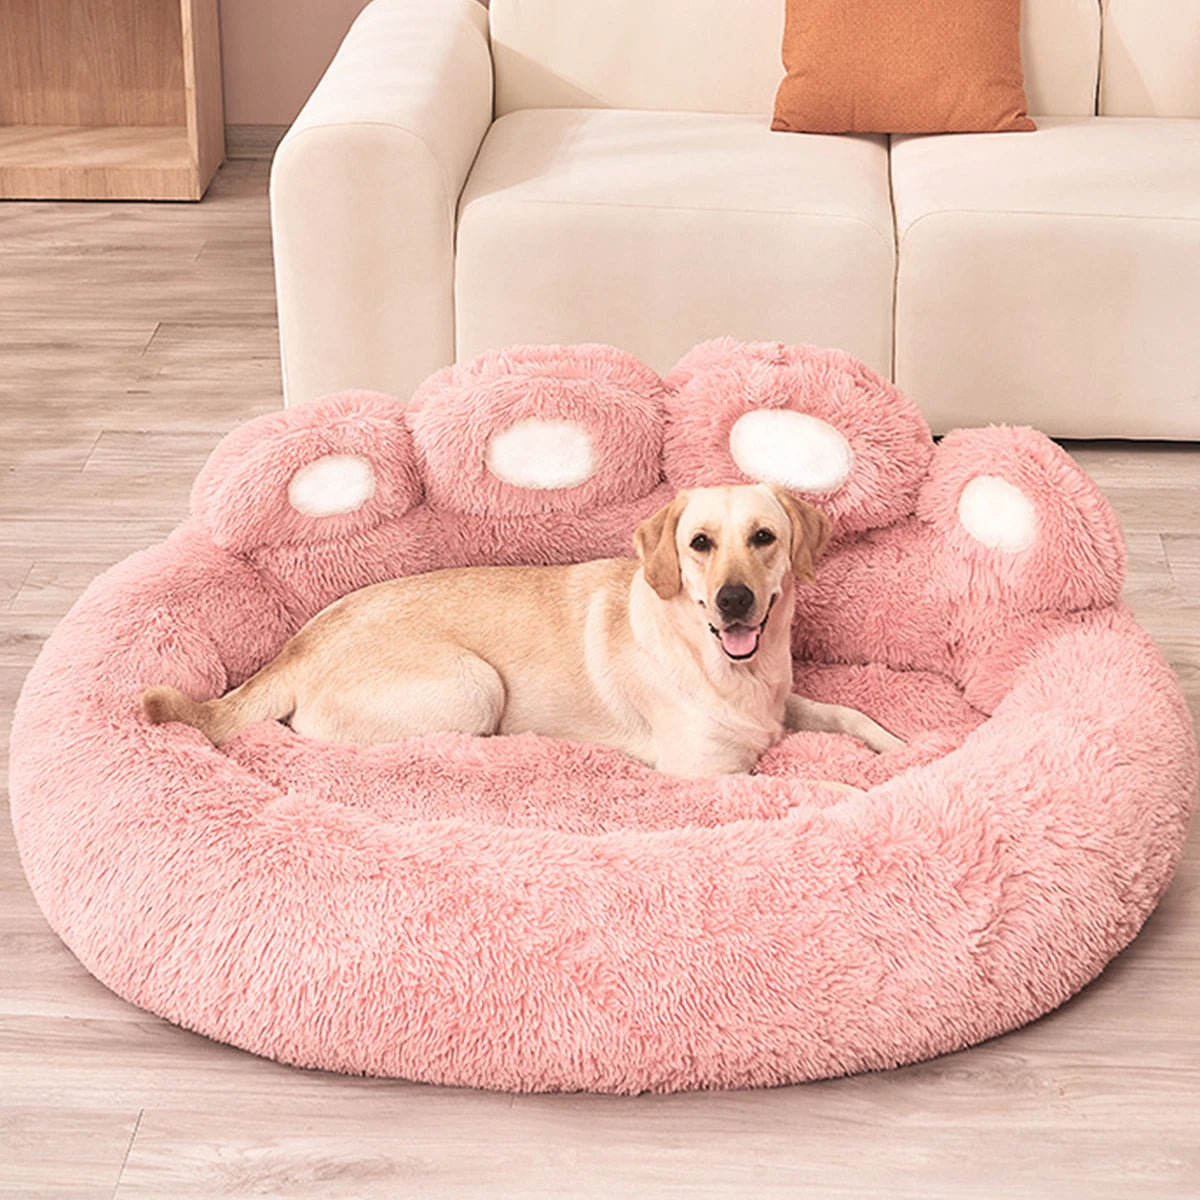 Fluffy Dog Bed Large Pet Products Dogs Beds Small Sofa Baskets Pets Kennel Mat Puppy Cats Supplies Basket Blanket Accessories